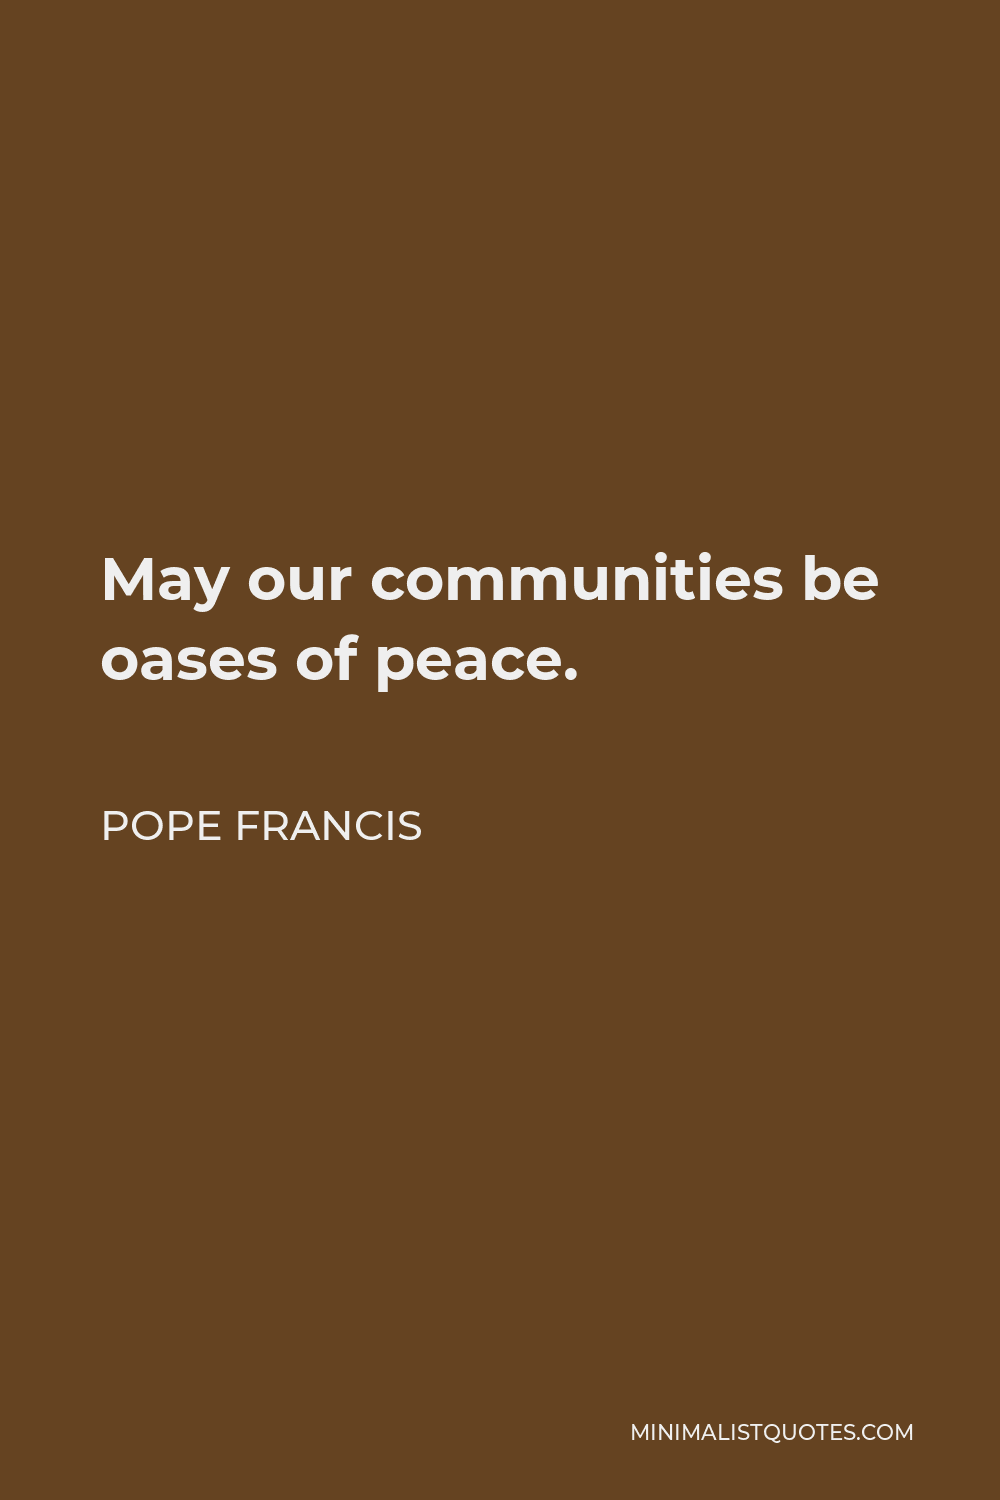 Pope Francis Quote - May our communities be oases of peace.